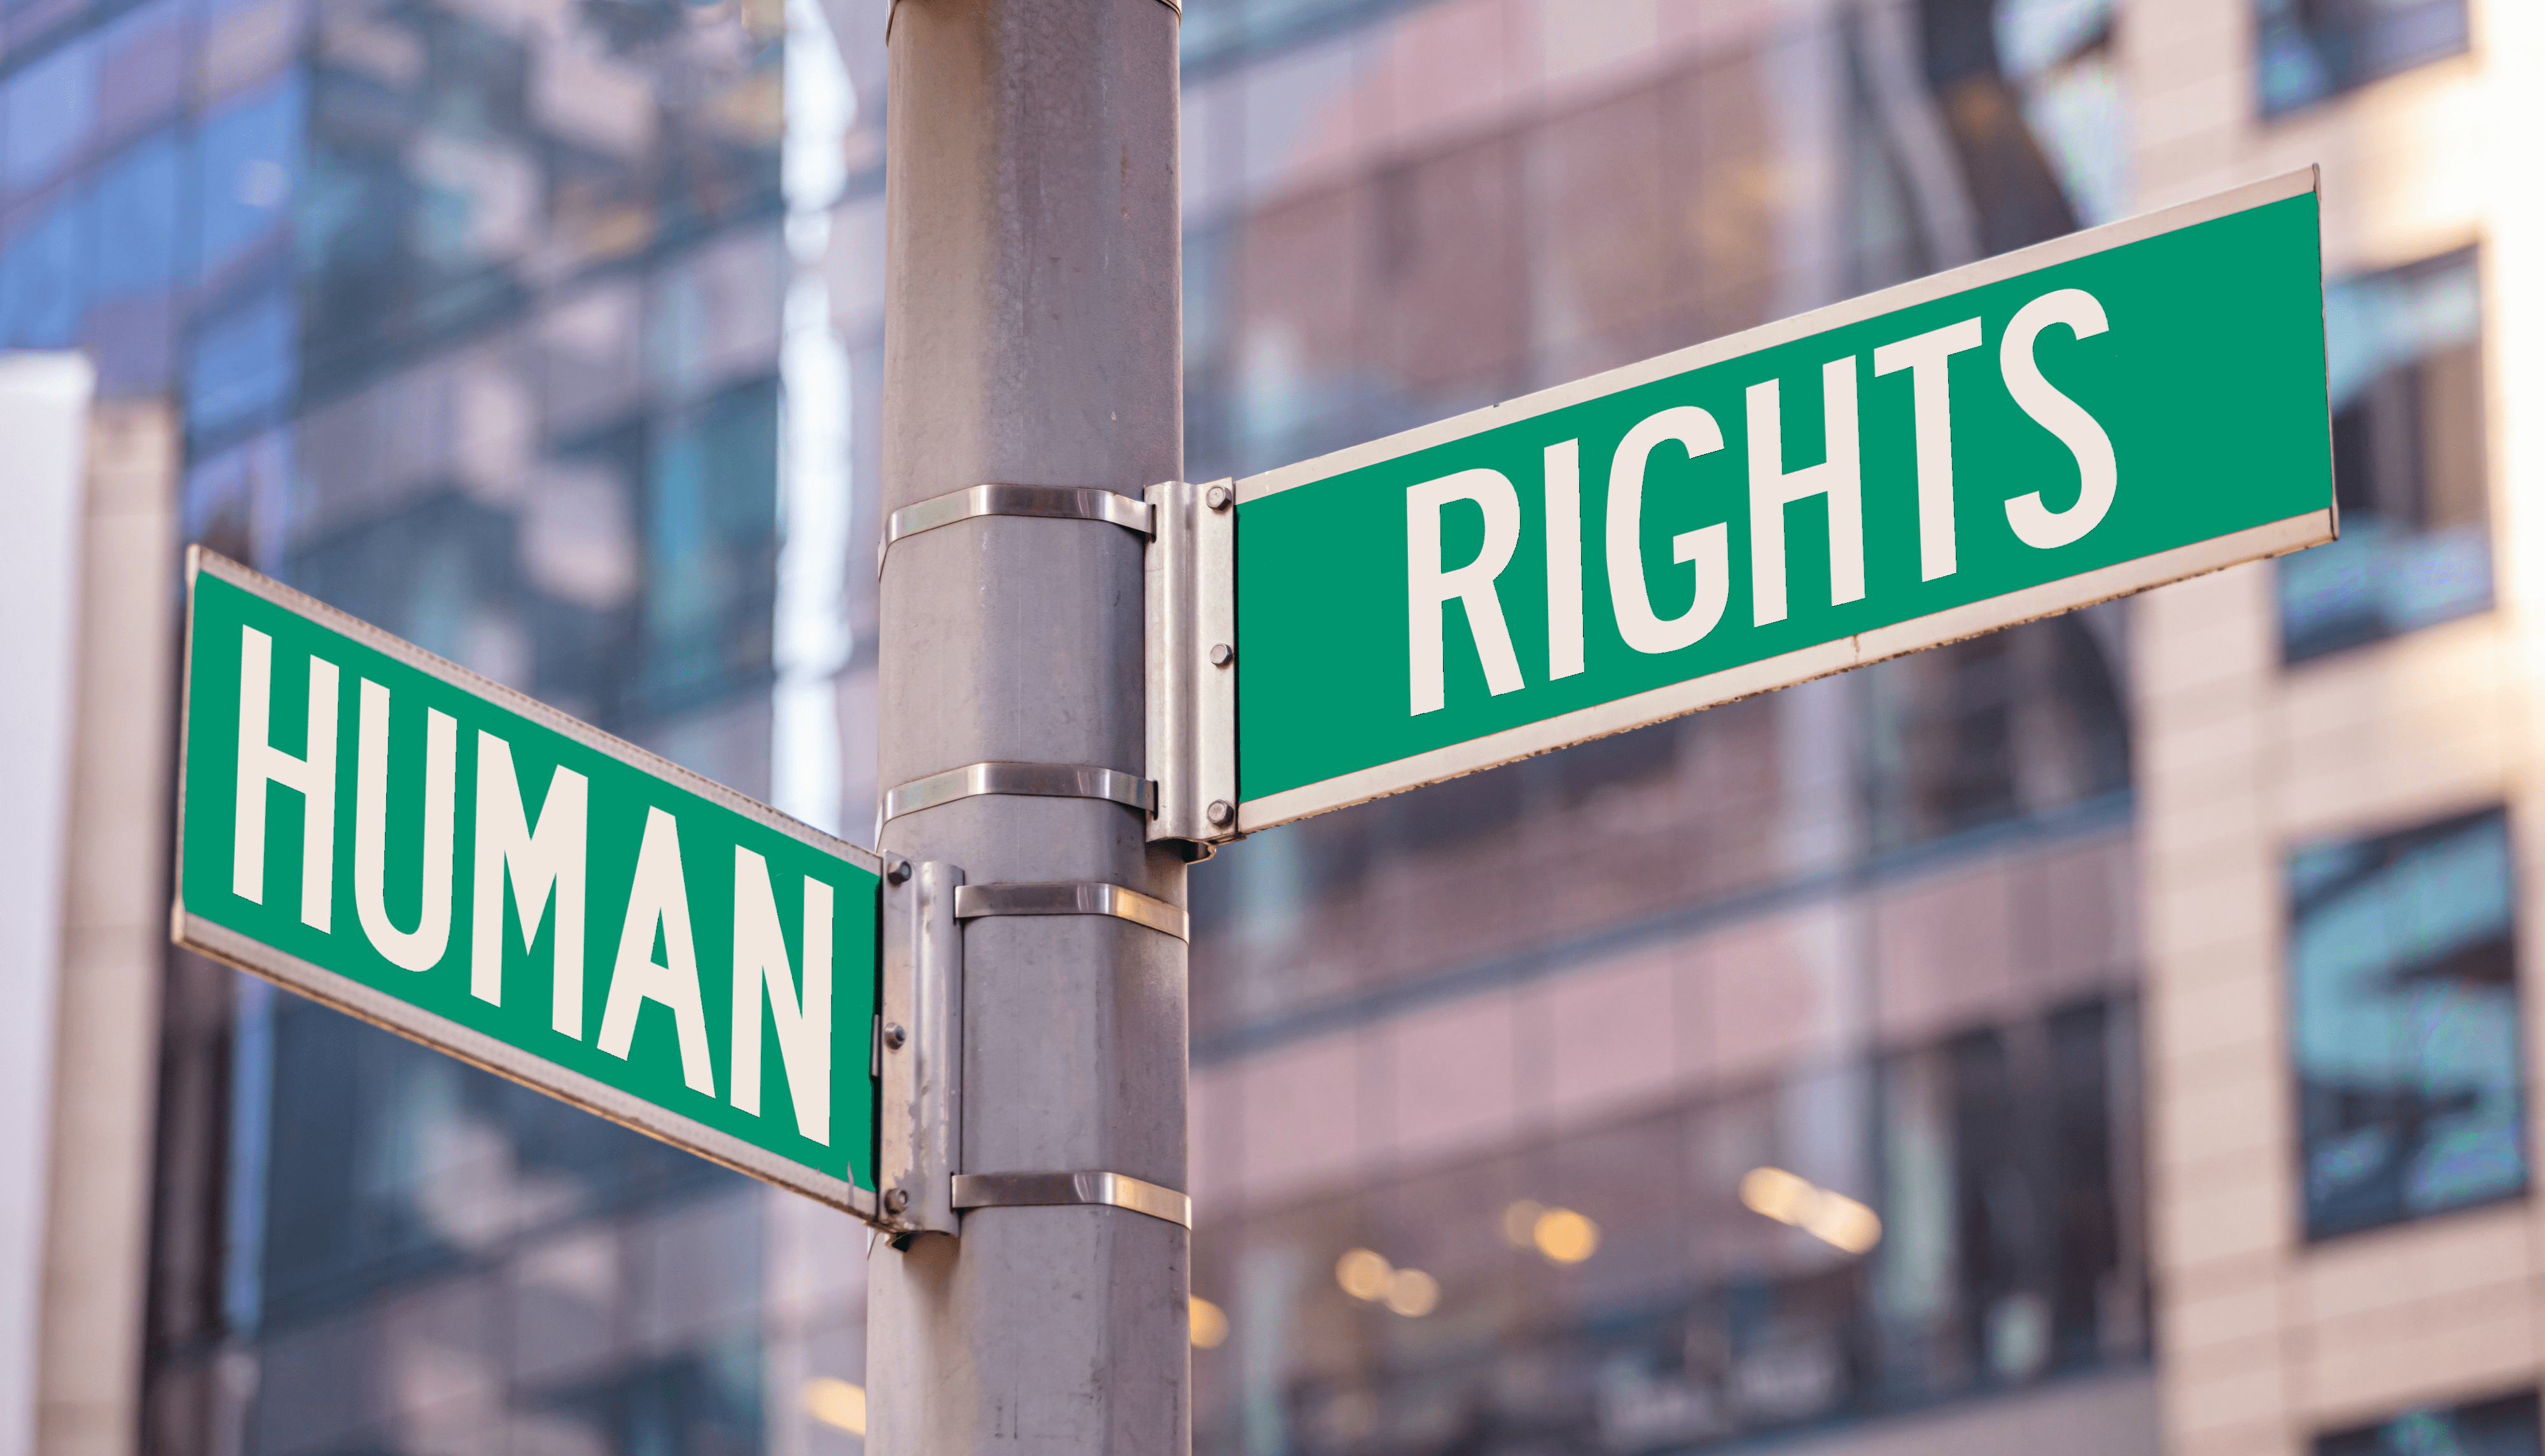 The words “Human” and “Rights” written on NYC intersection street signs